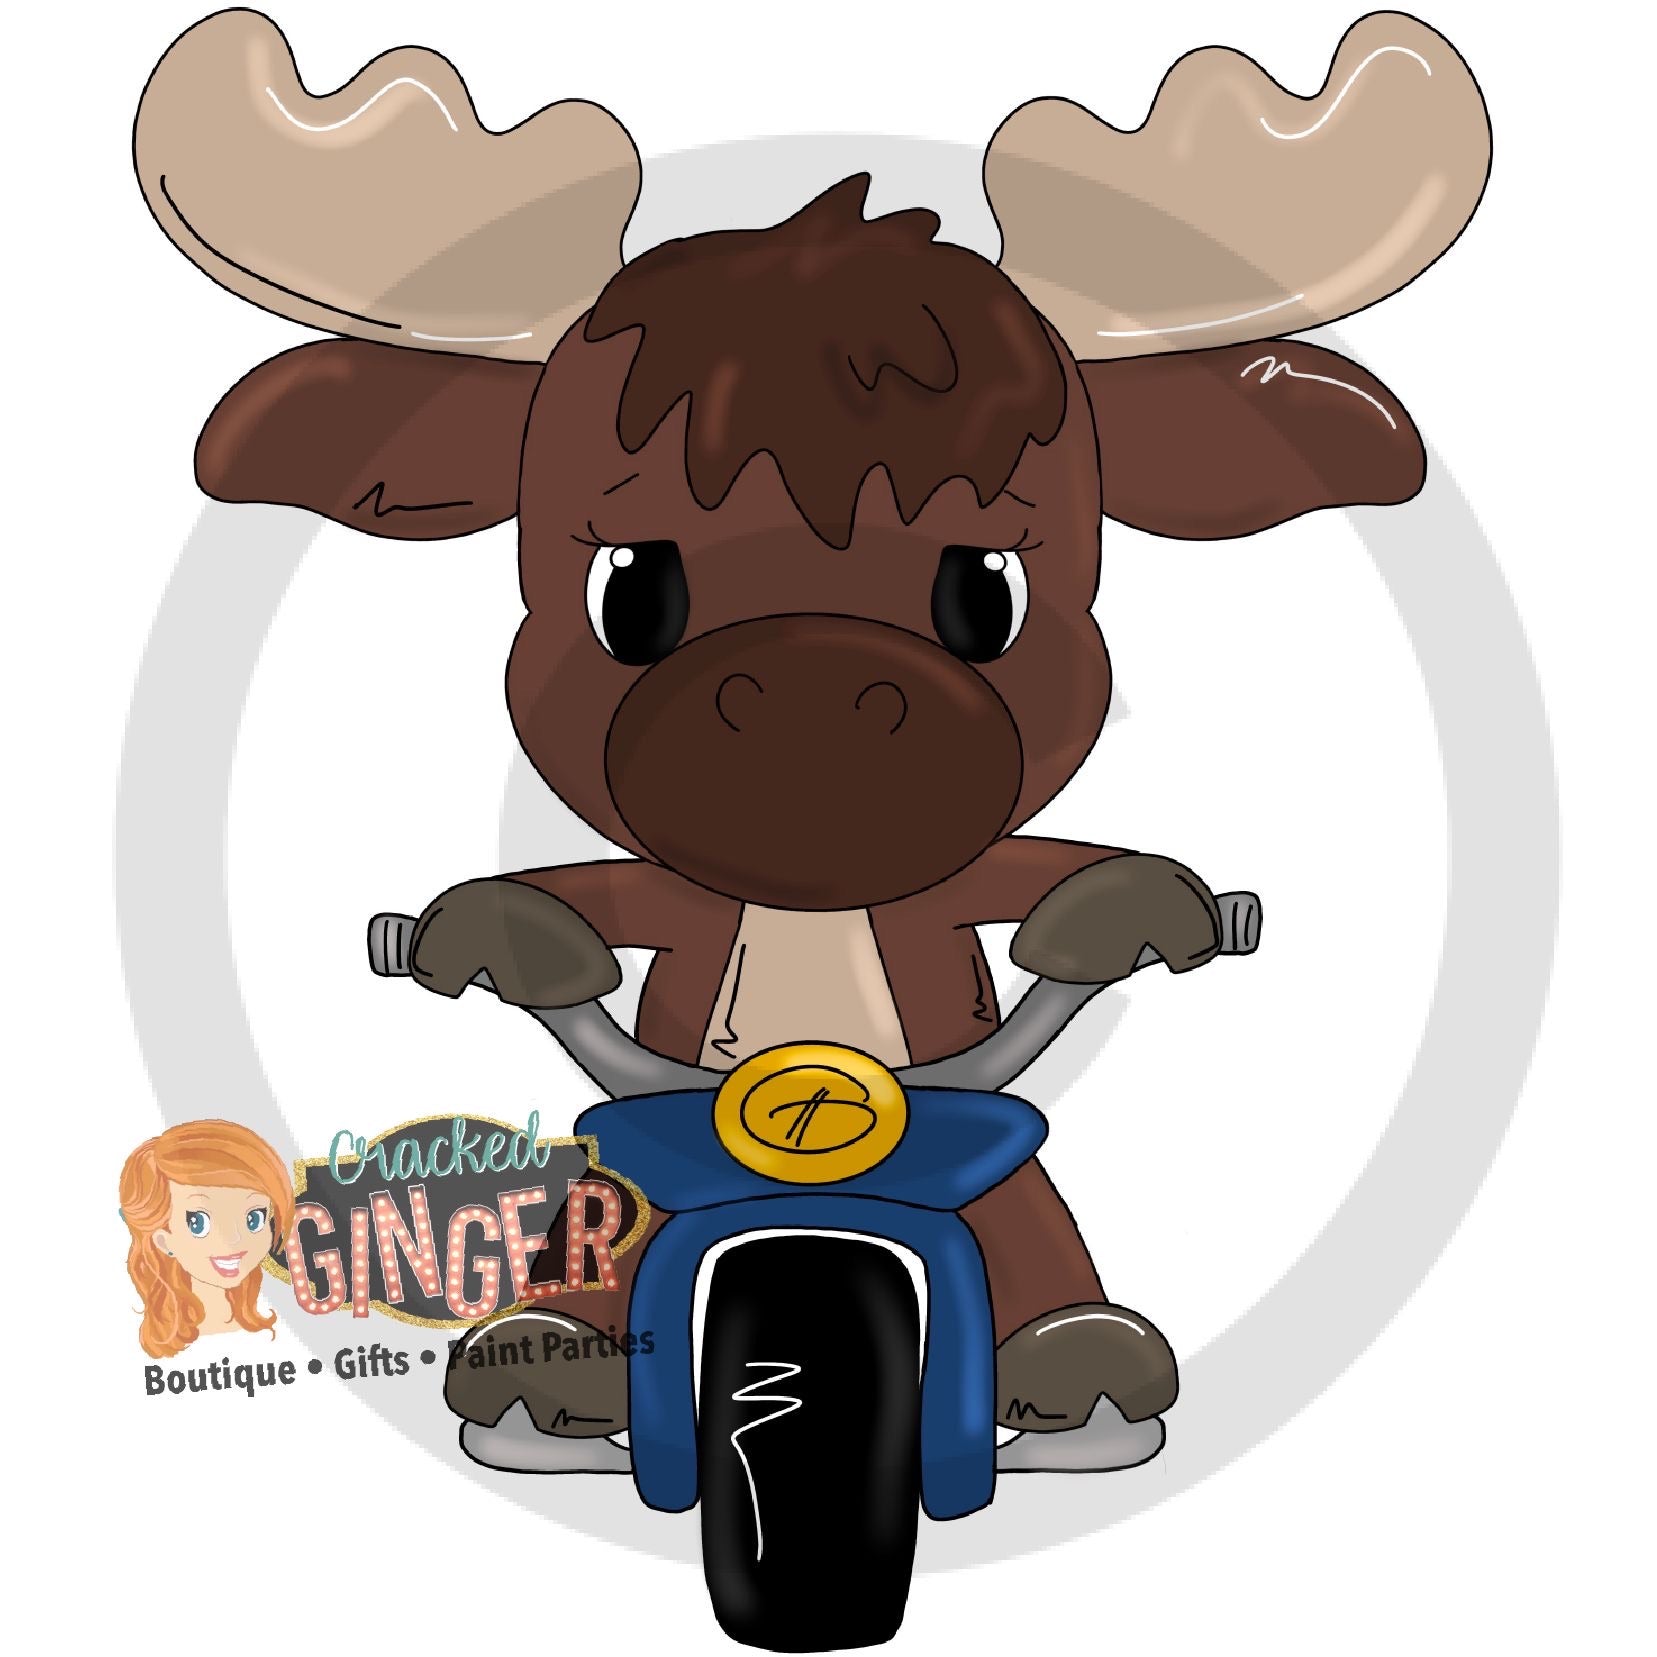 Moose on a motorcycle